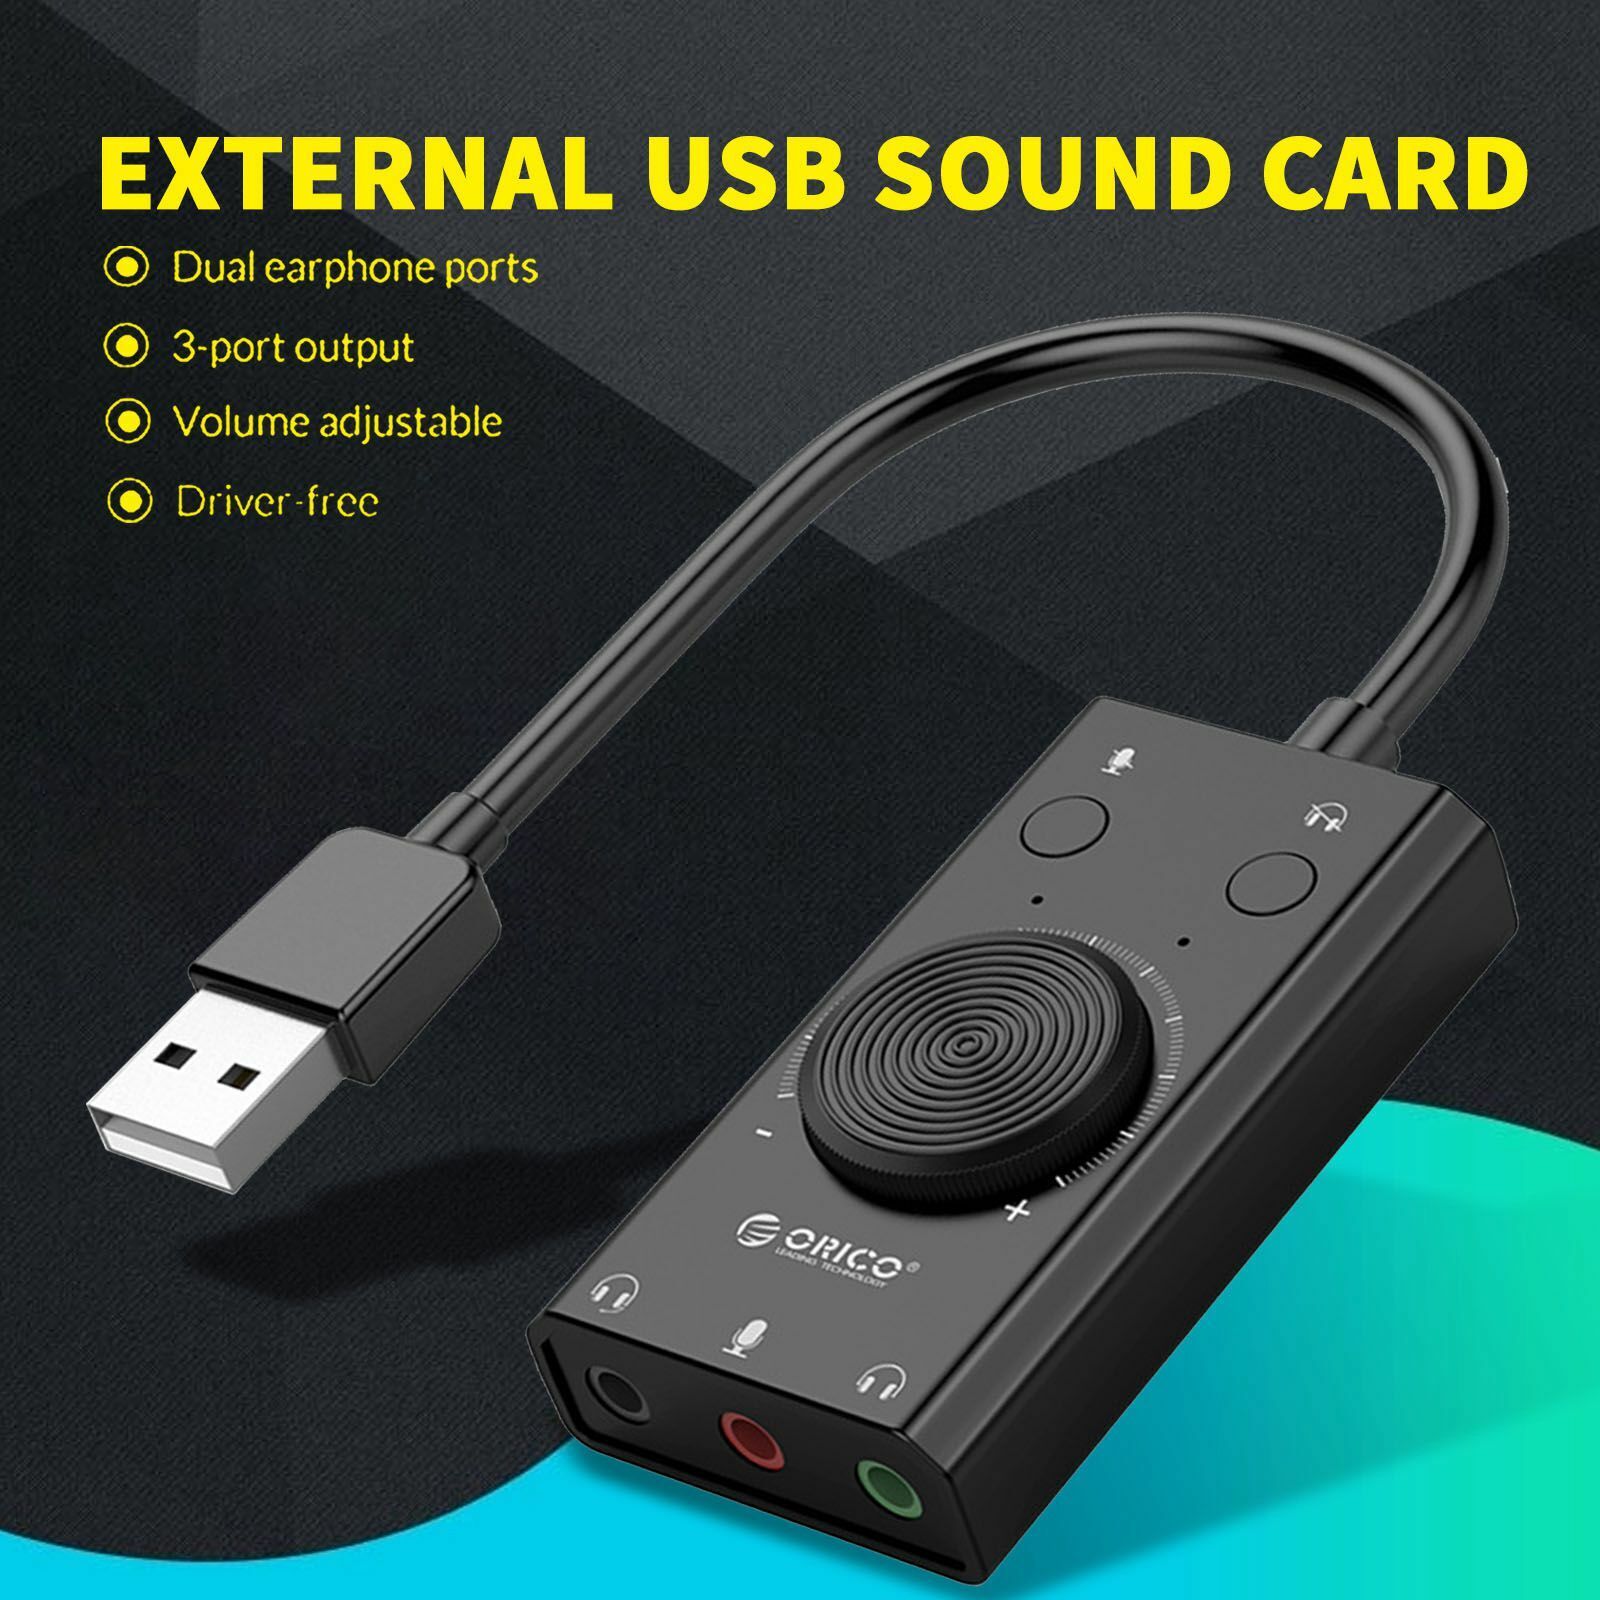 2 in 1 USB External Sound Card Max Colorado Springs Mall 41% OFF Port Output 3 For Lap Volume With